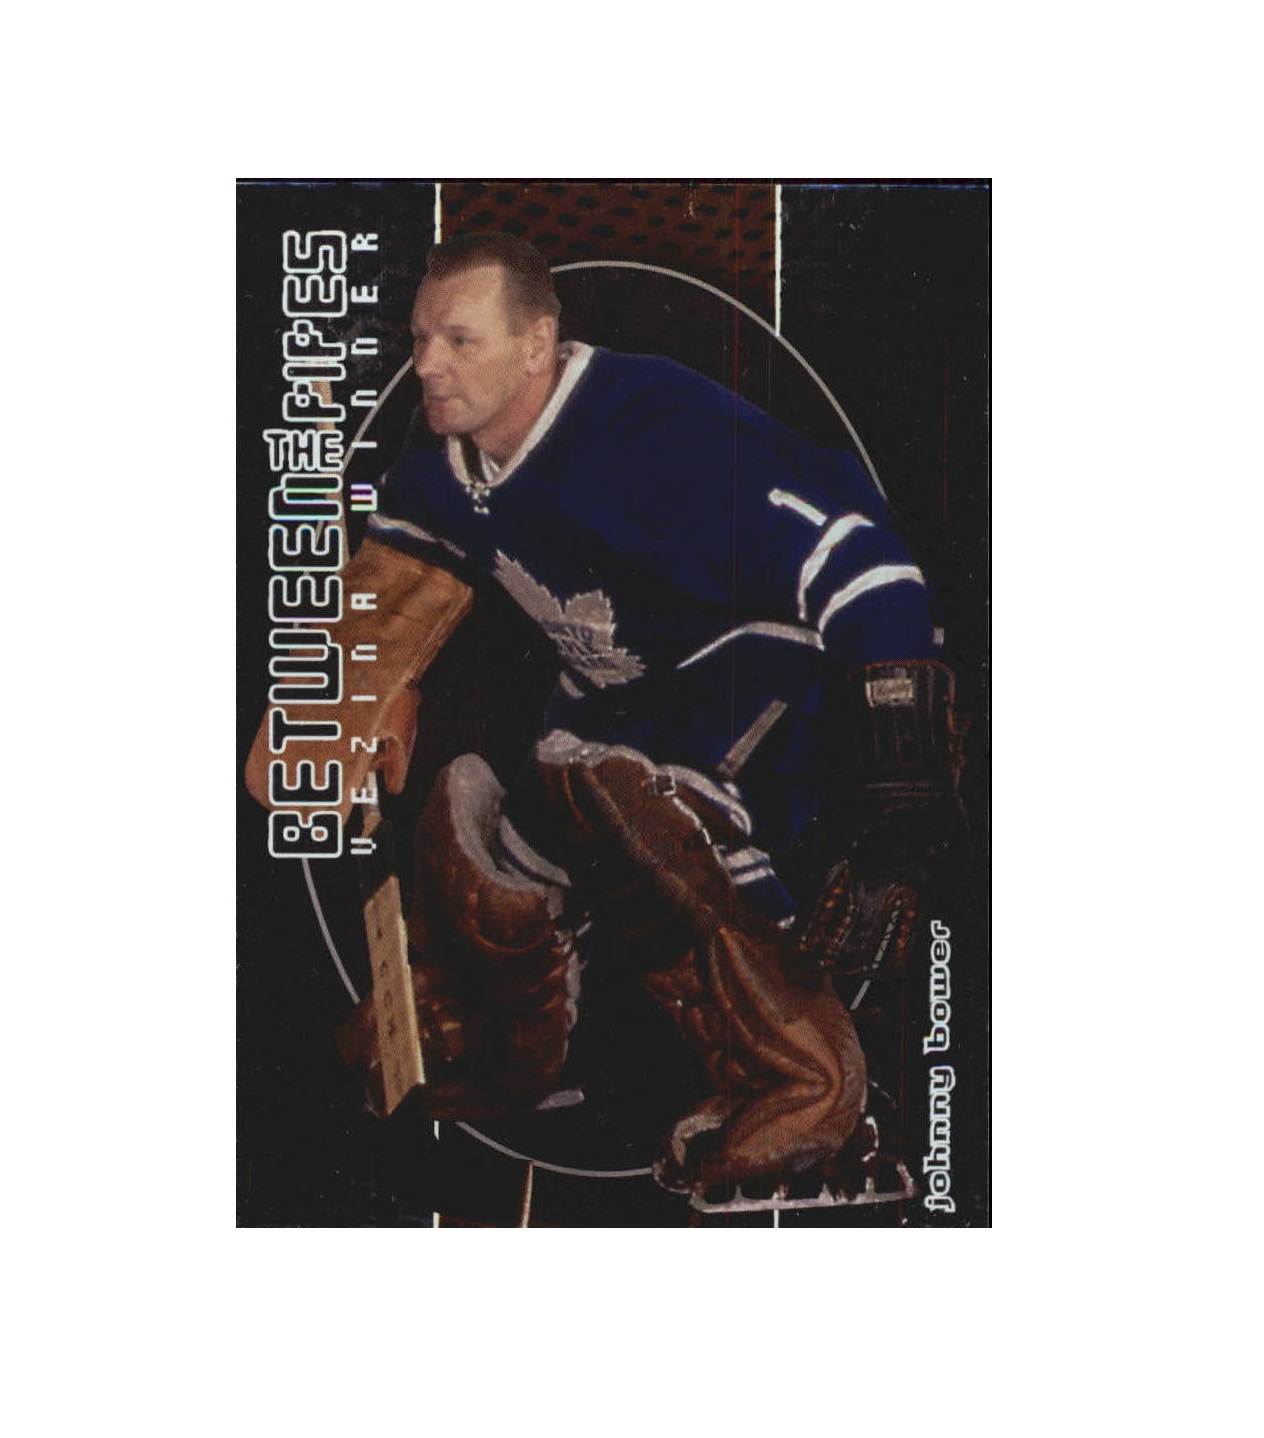 2001-02 Between the Pipes #123 Johnny Bower (10-X218-MAPLE LEAFS)